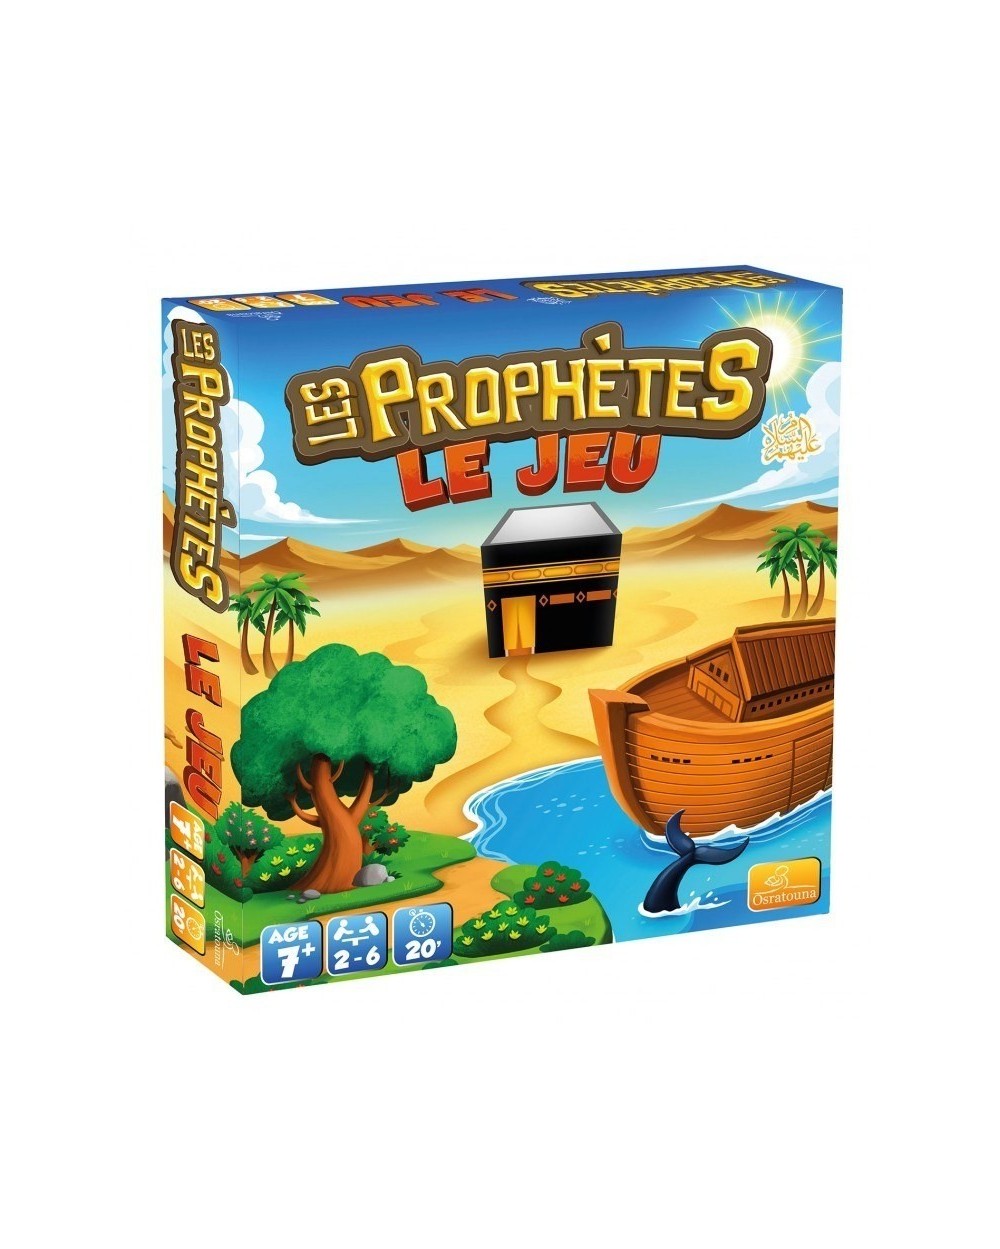 PROPHETS, THE GAME - 400 QUESTIONS AND CHALLENGES! (FROM 7 YEARS OLD) - OSRATOUNA